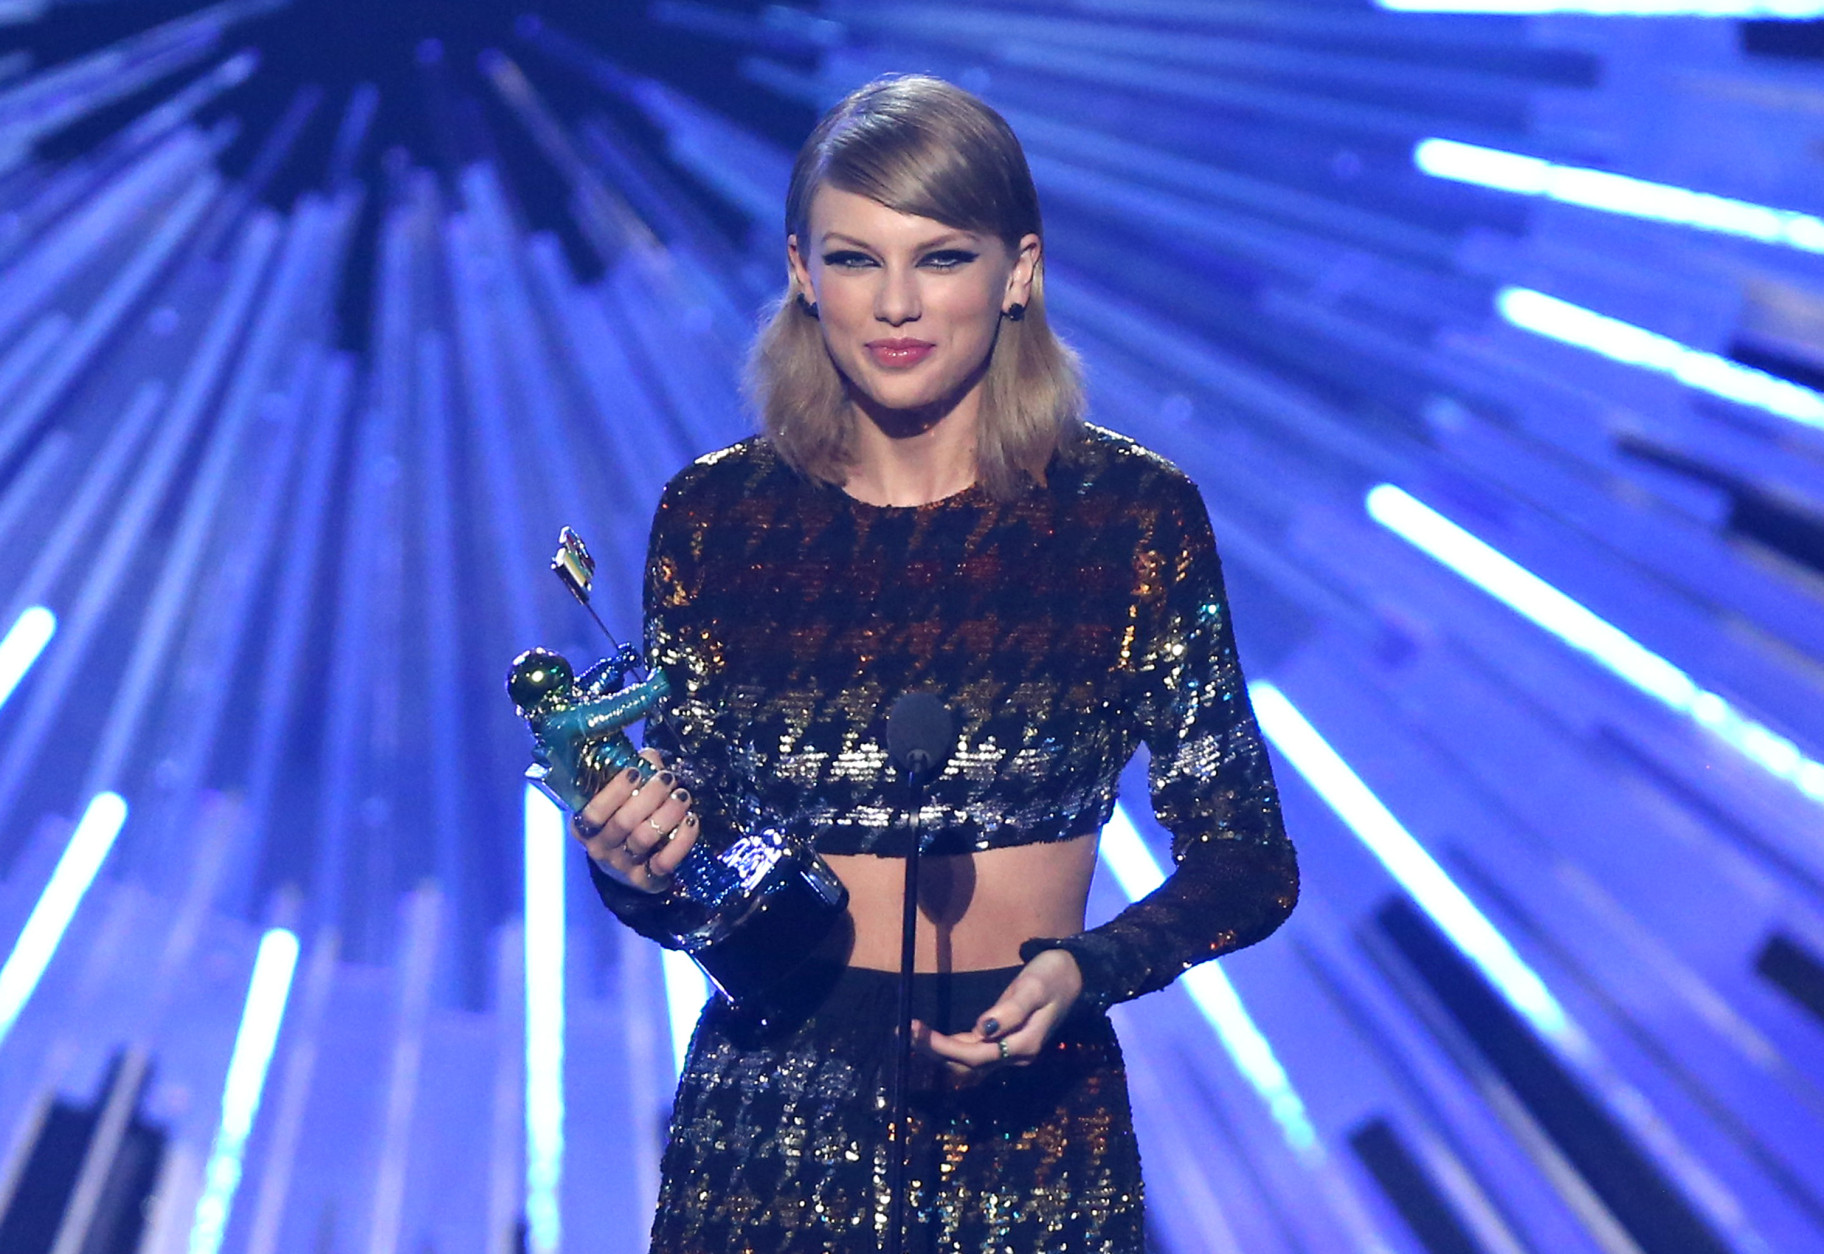 Taylor Swift accepts the award for female video of the year for Blank Space at the MTV Video Music Awards at the Microsoft Theater on Sunday, Aug. 30, 2015, in Los Angeles. (Photo by Matt Sayles/Invision/AP)